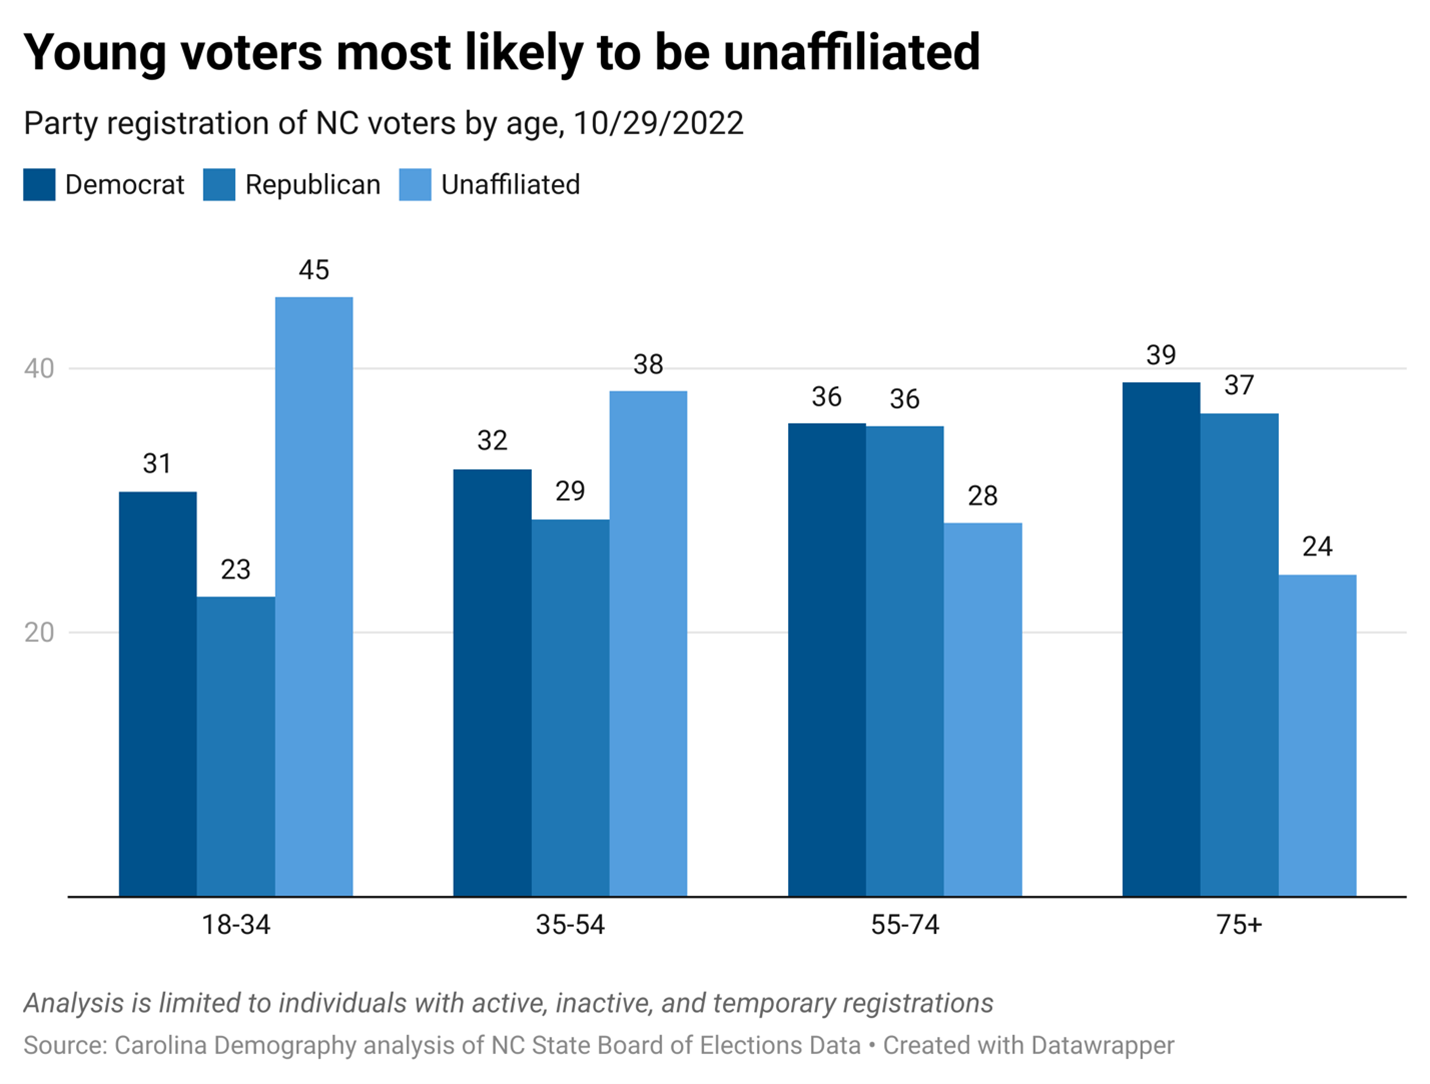 Young voters are more likely to register as unaffiliated than any other age group: 45% of 18-34 year-olds are registered unaffiliated versus 38% of 35-44 year-olds, 28% of 55-74 year-olds, and 24% of voters 75 and older.